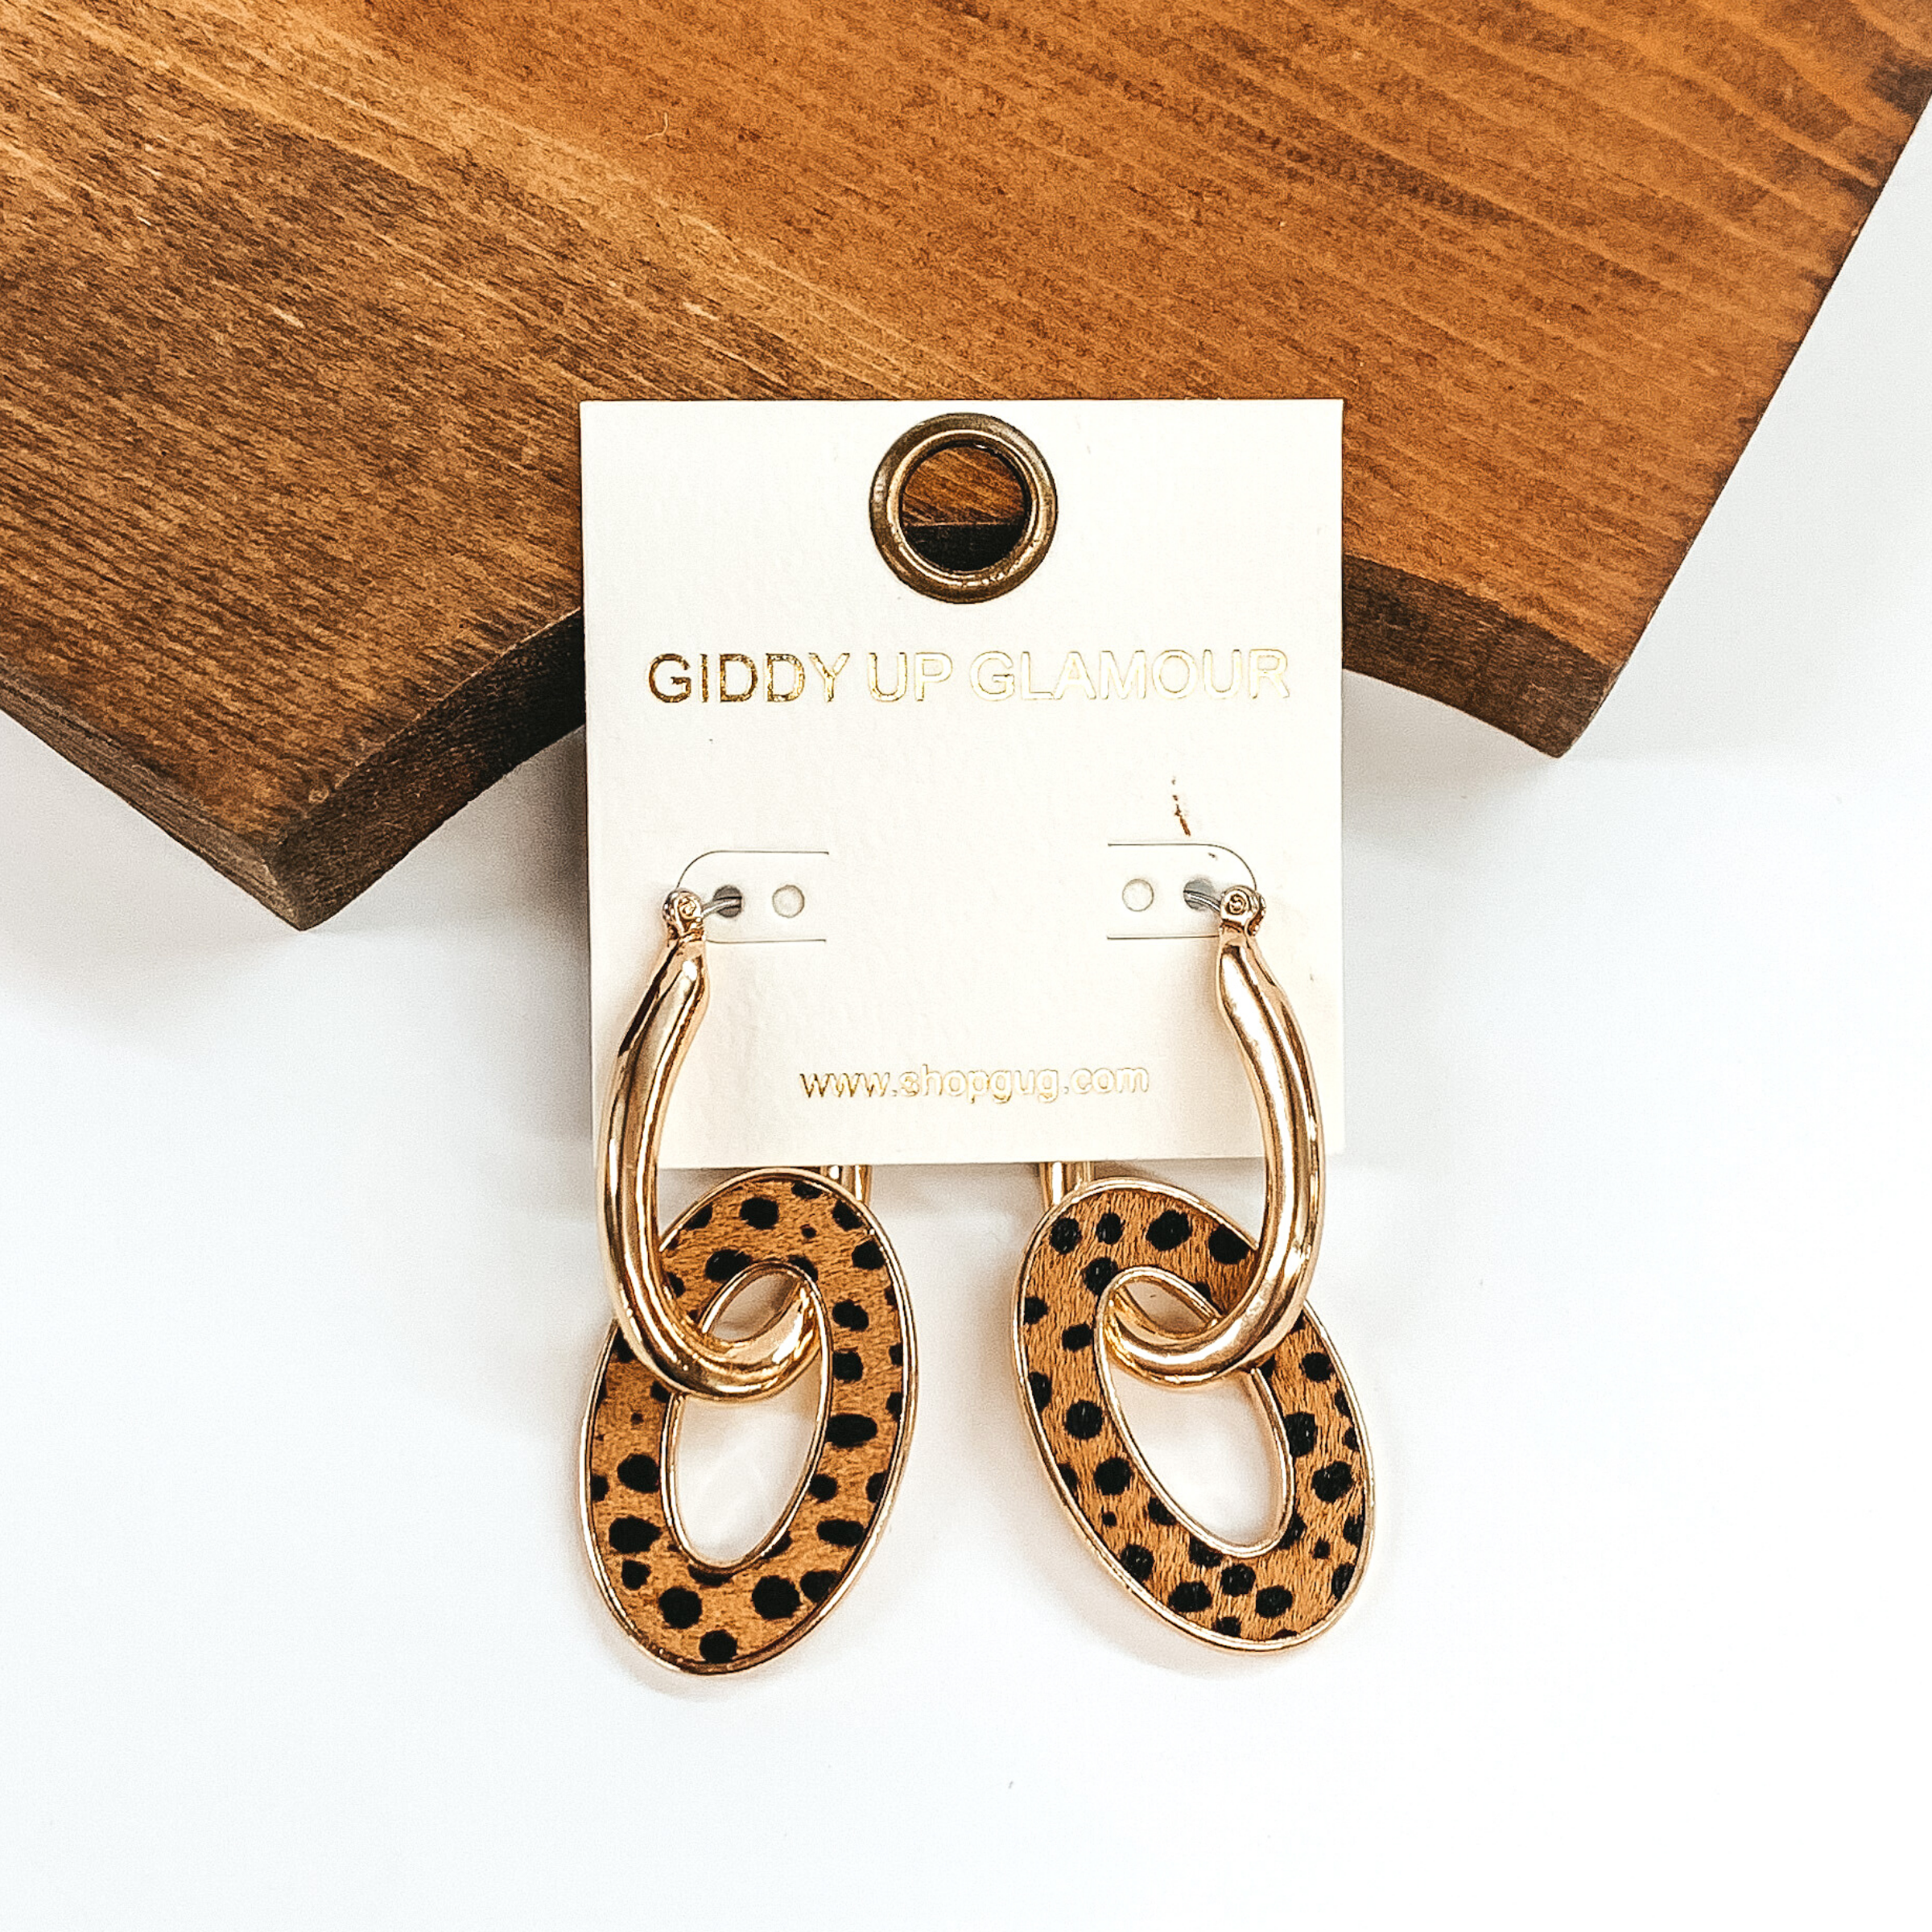 Gold oval hoop earrings with another oval link hanging. The hanging oval has a brown hide inlay that has a black dotted print. These earrings are pictured laying against some brown wood on a white background.